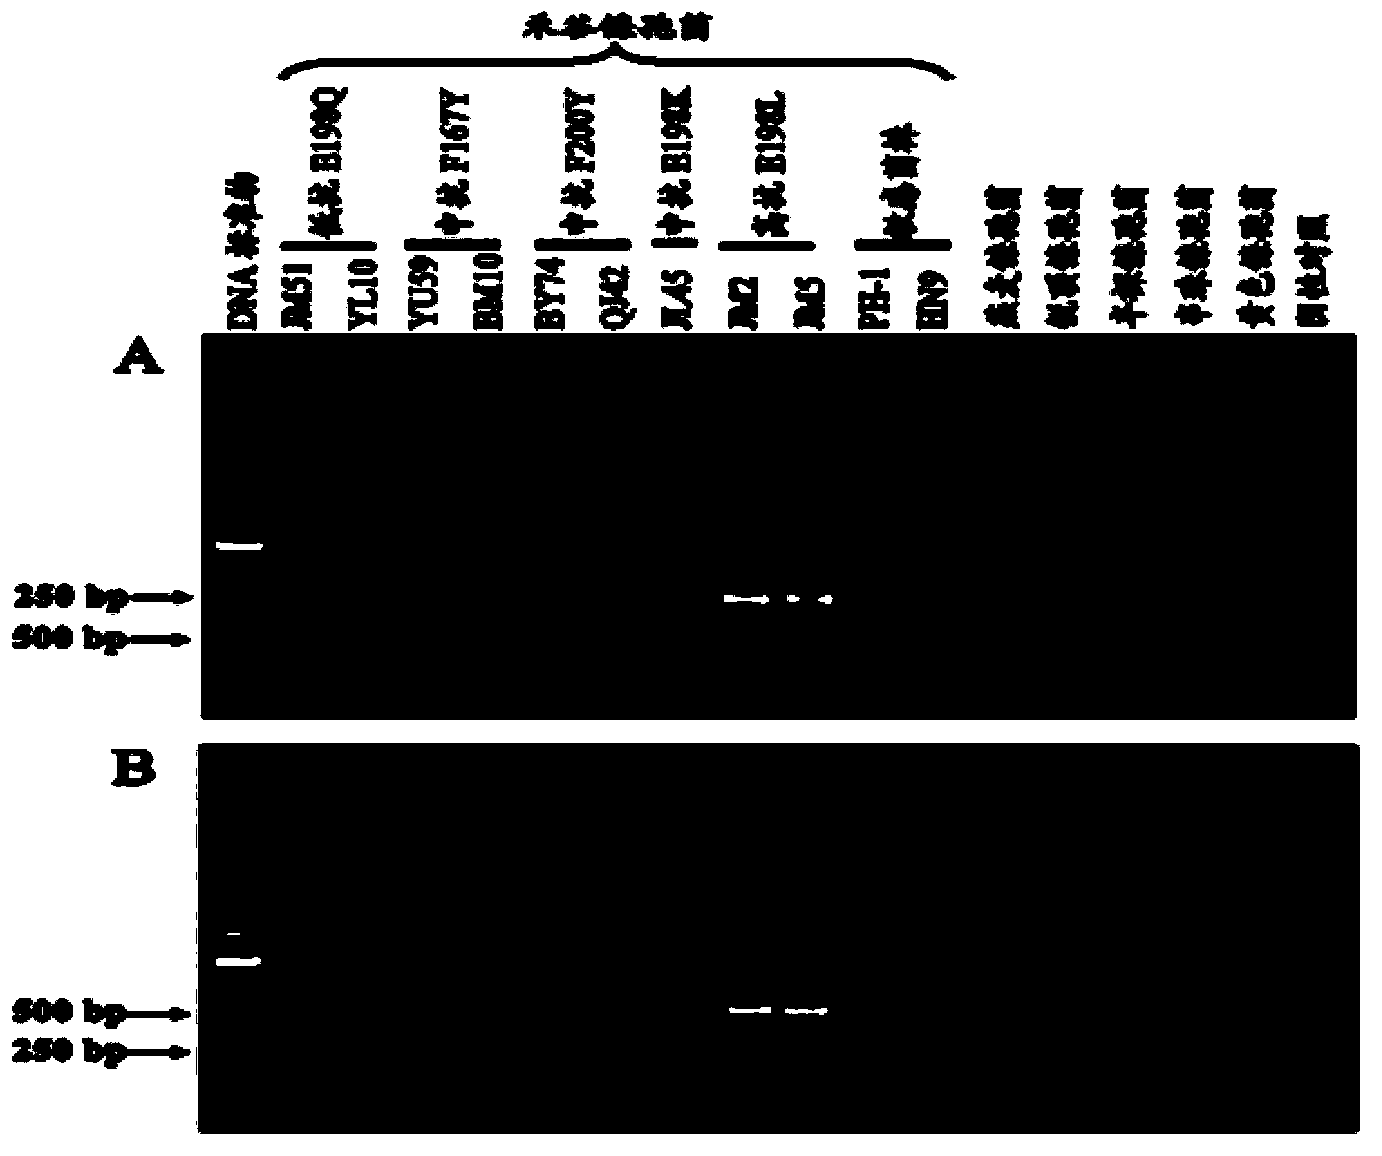 Primer and method for detecting fusarium graminearum with high resistance to carbendazim